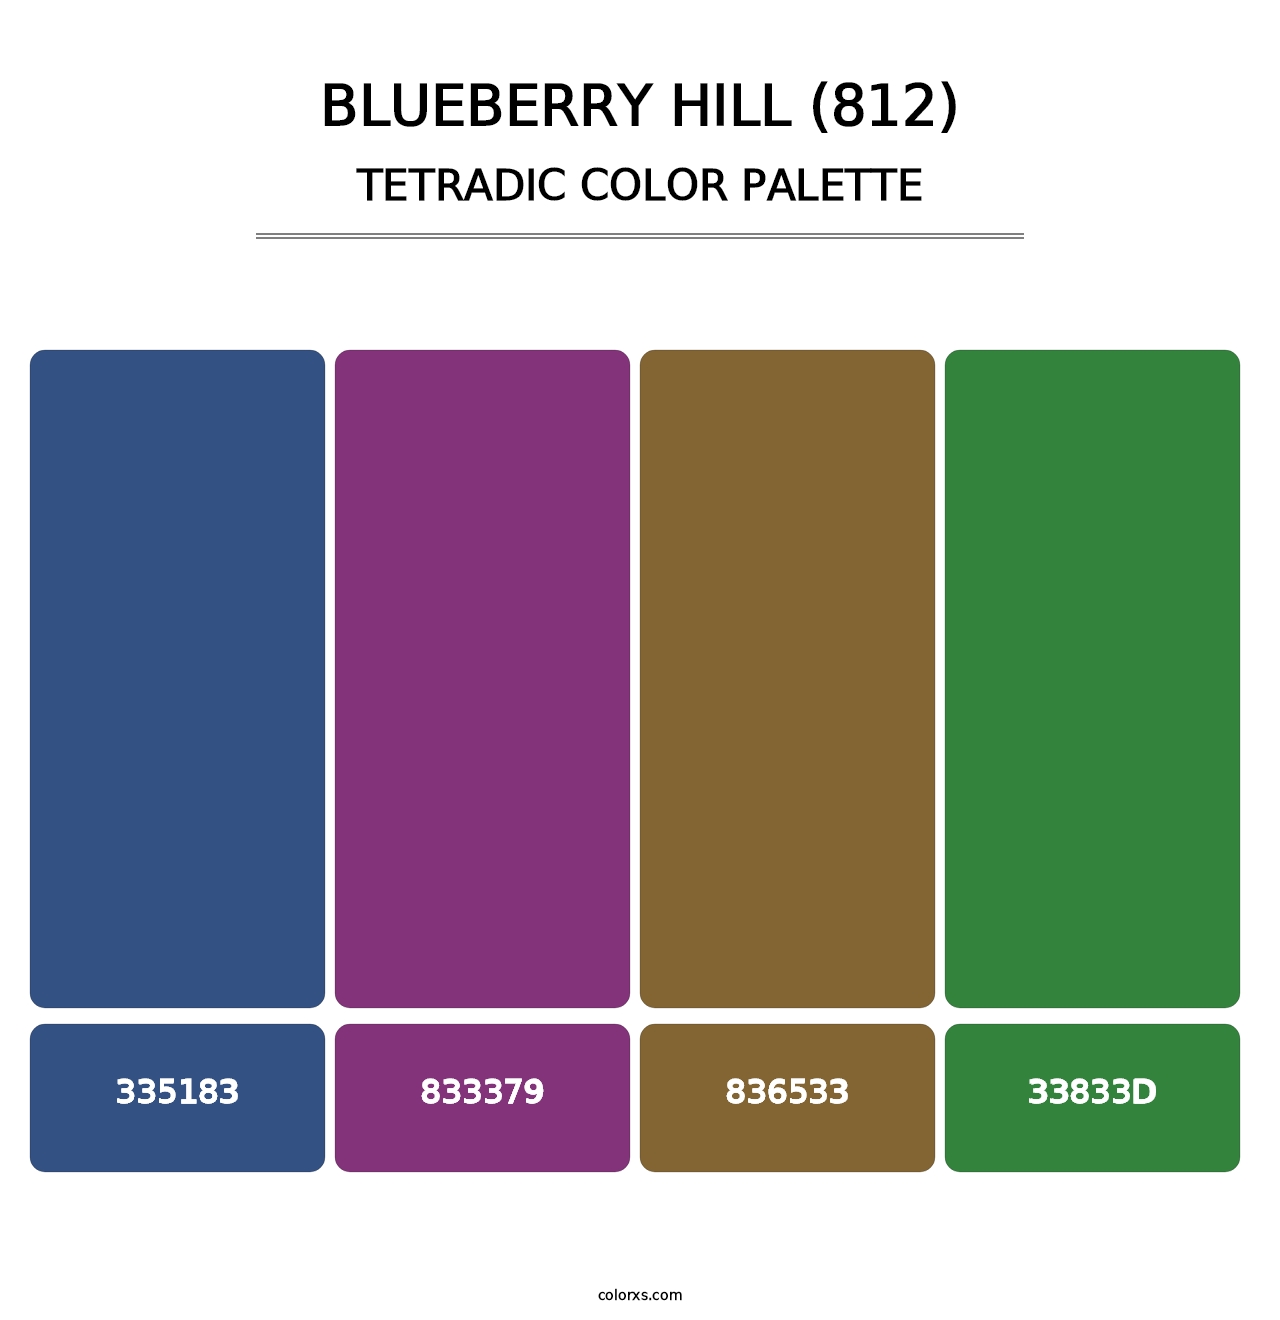 Blueberry Hill (812) - Tetradic Color Palette